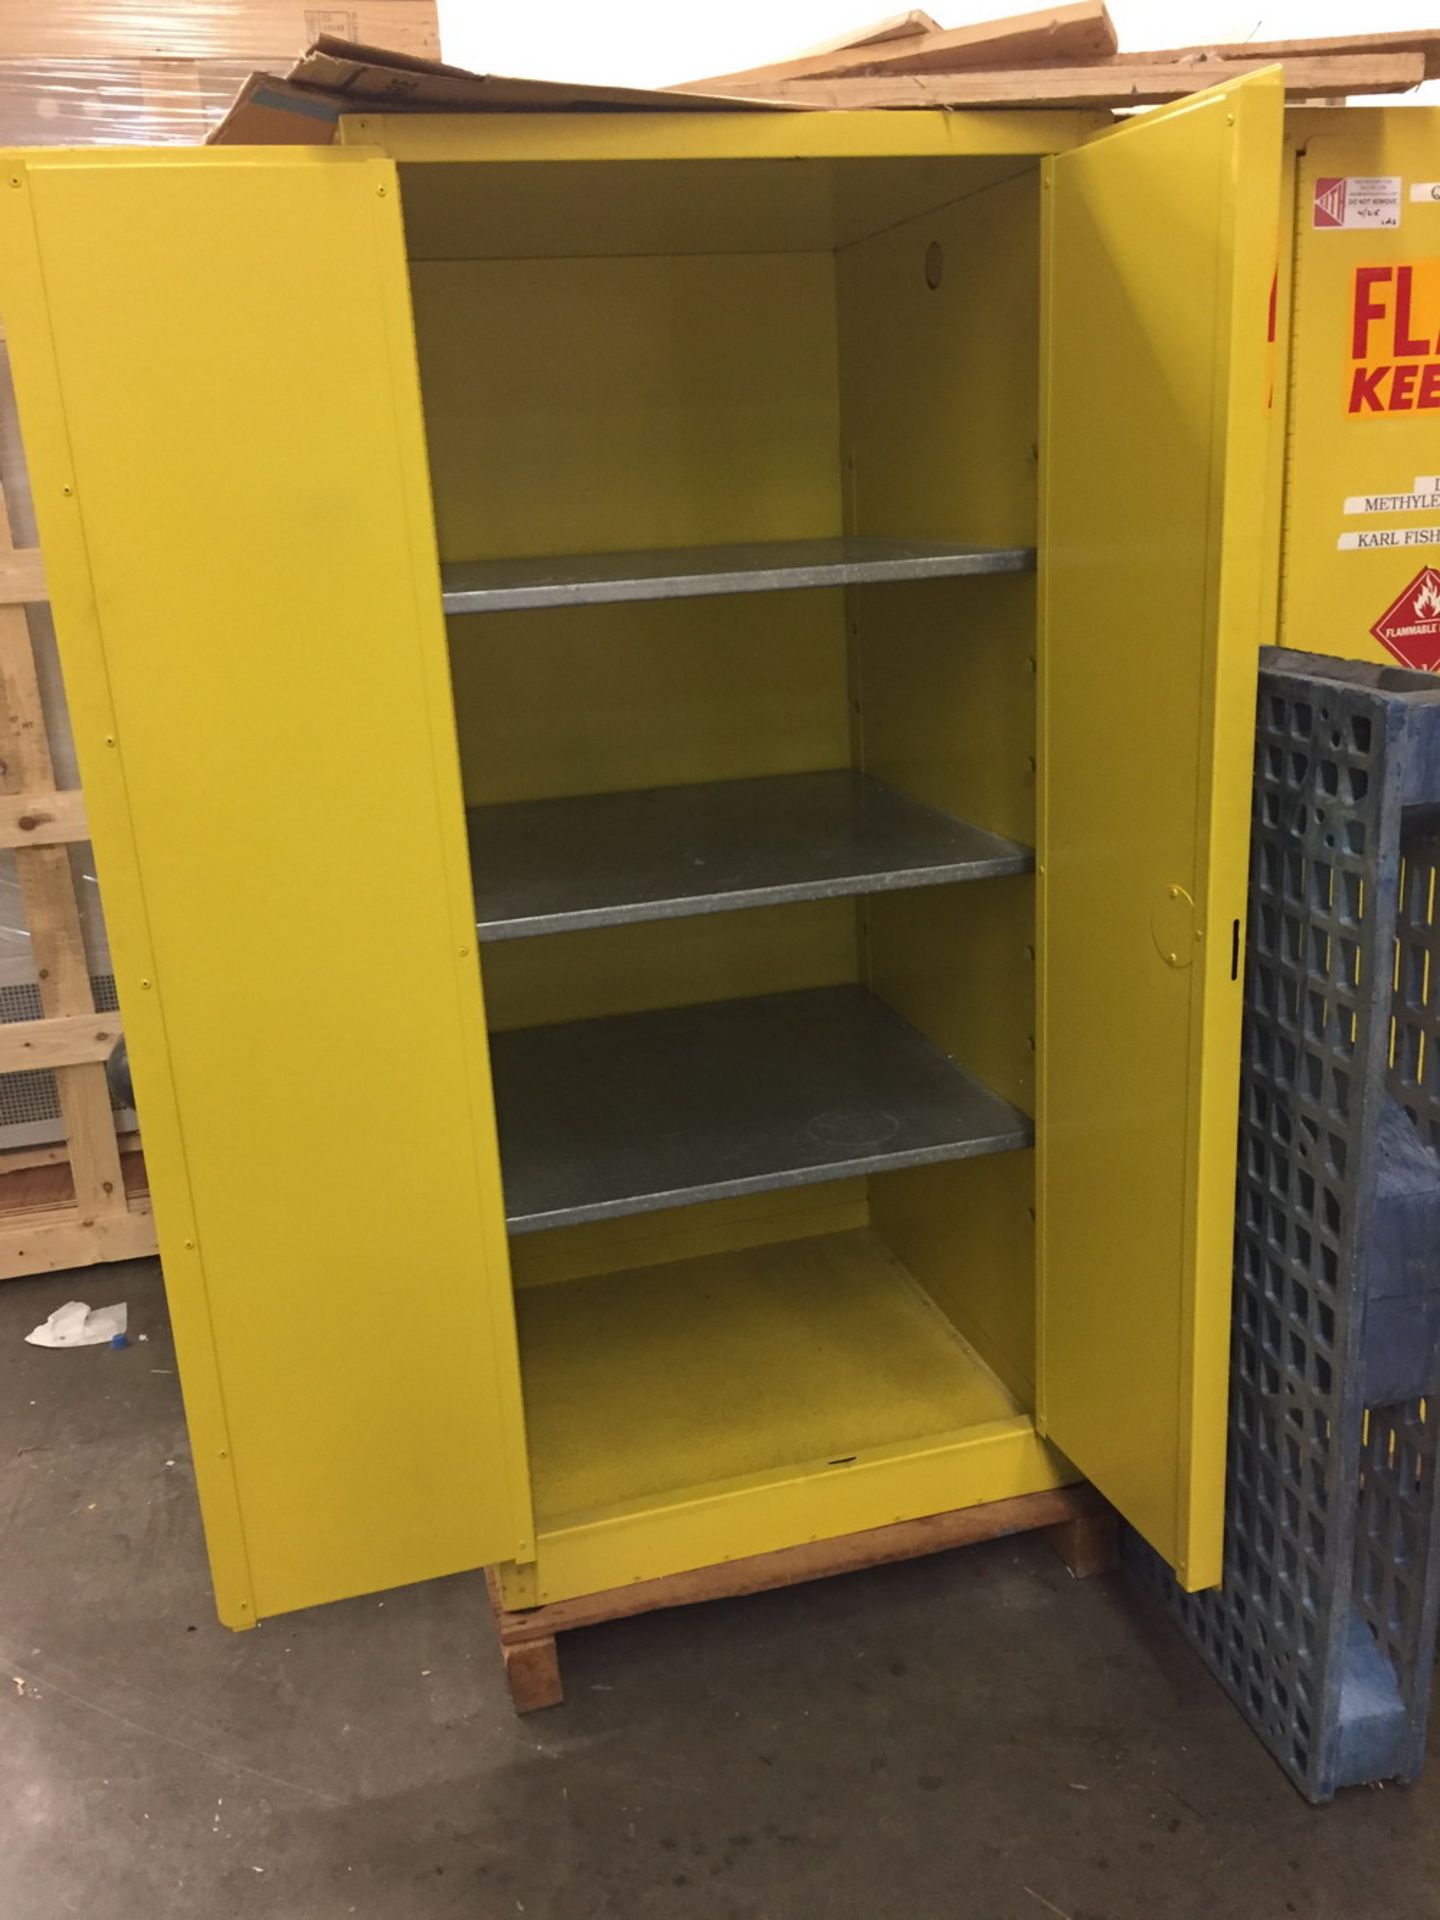 (3) Eagle 60 gallon Two Door Flammable Storage Cabinet, Model 1962 - Image 4 of 4